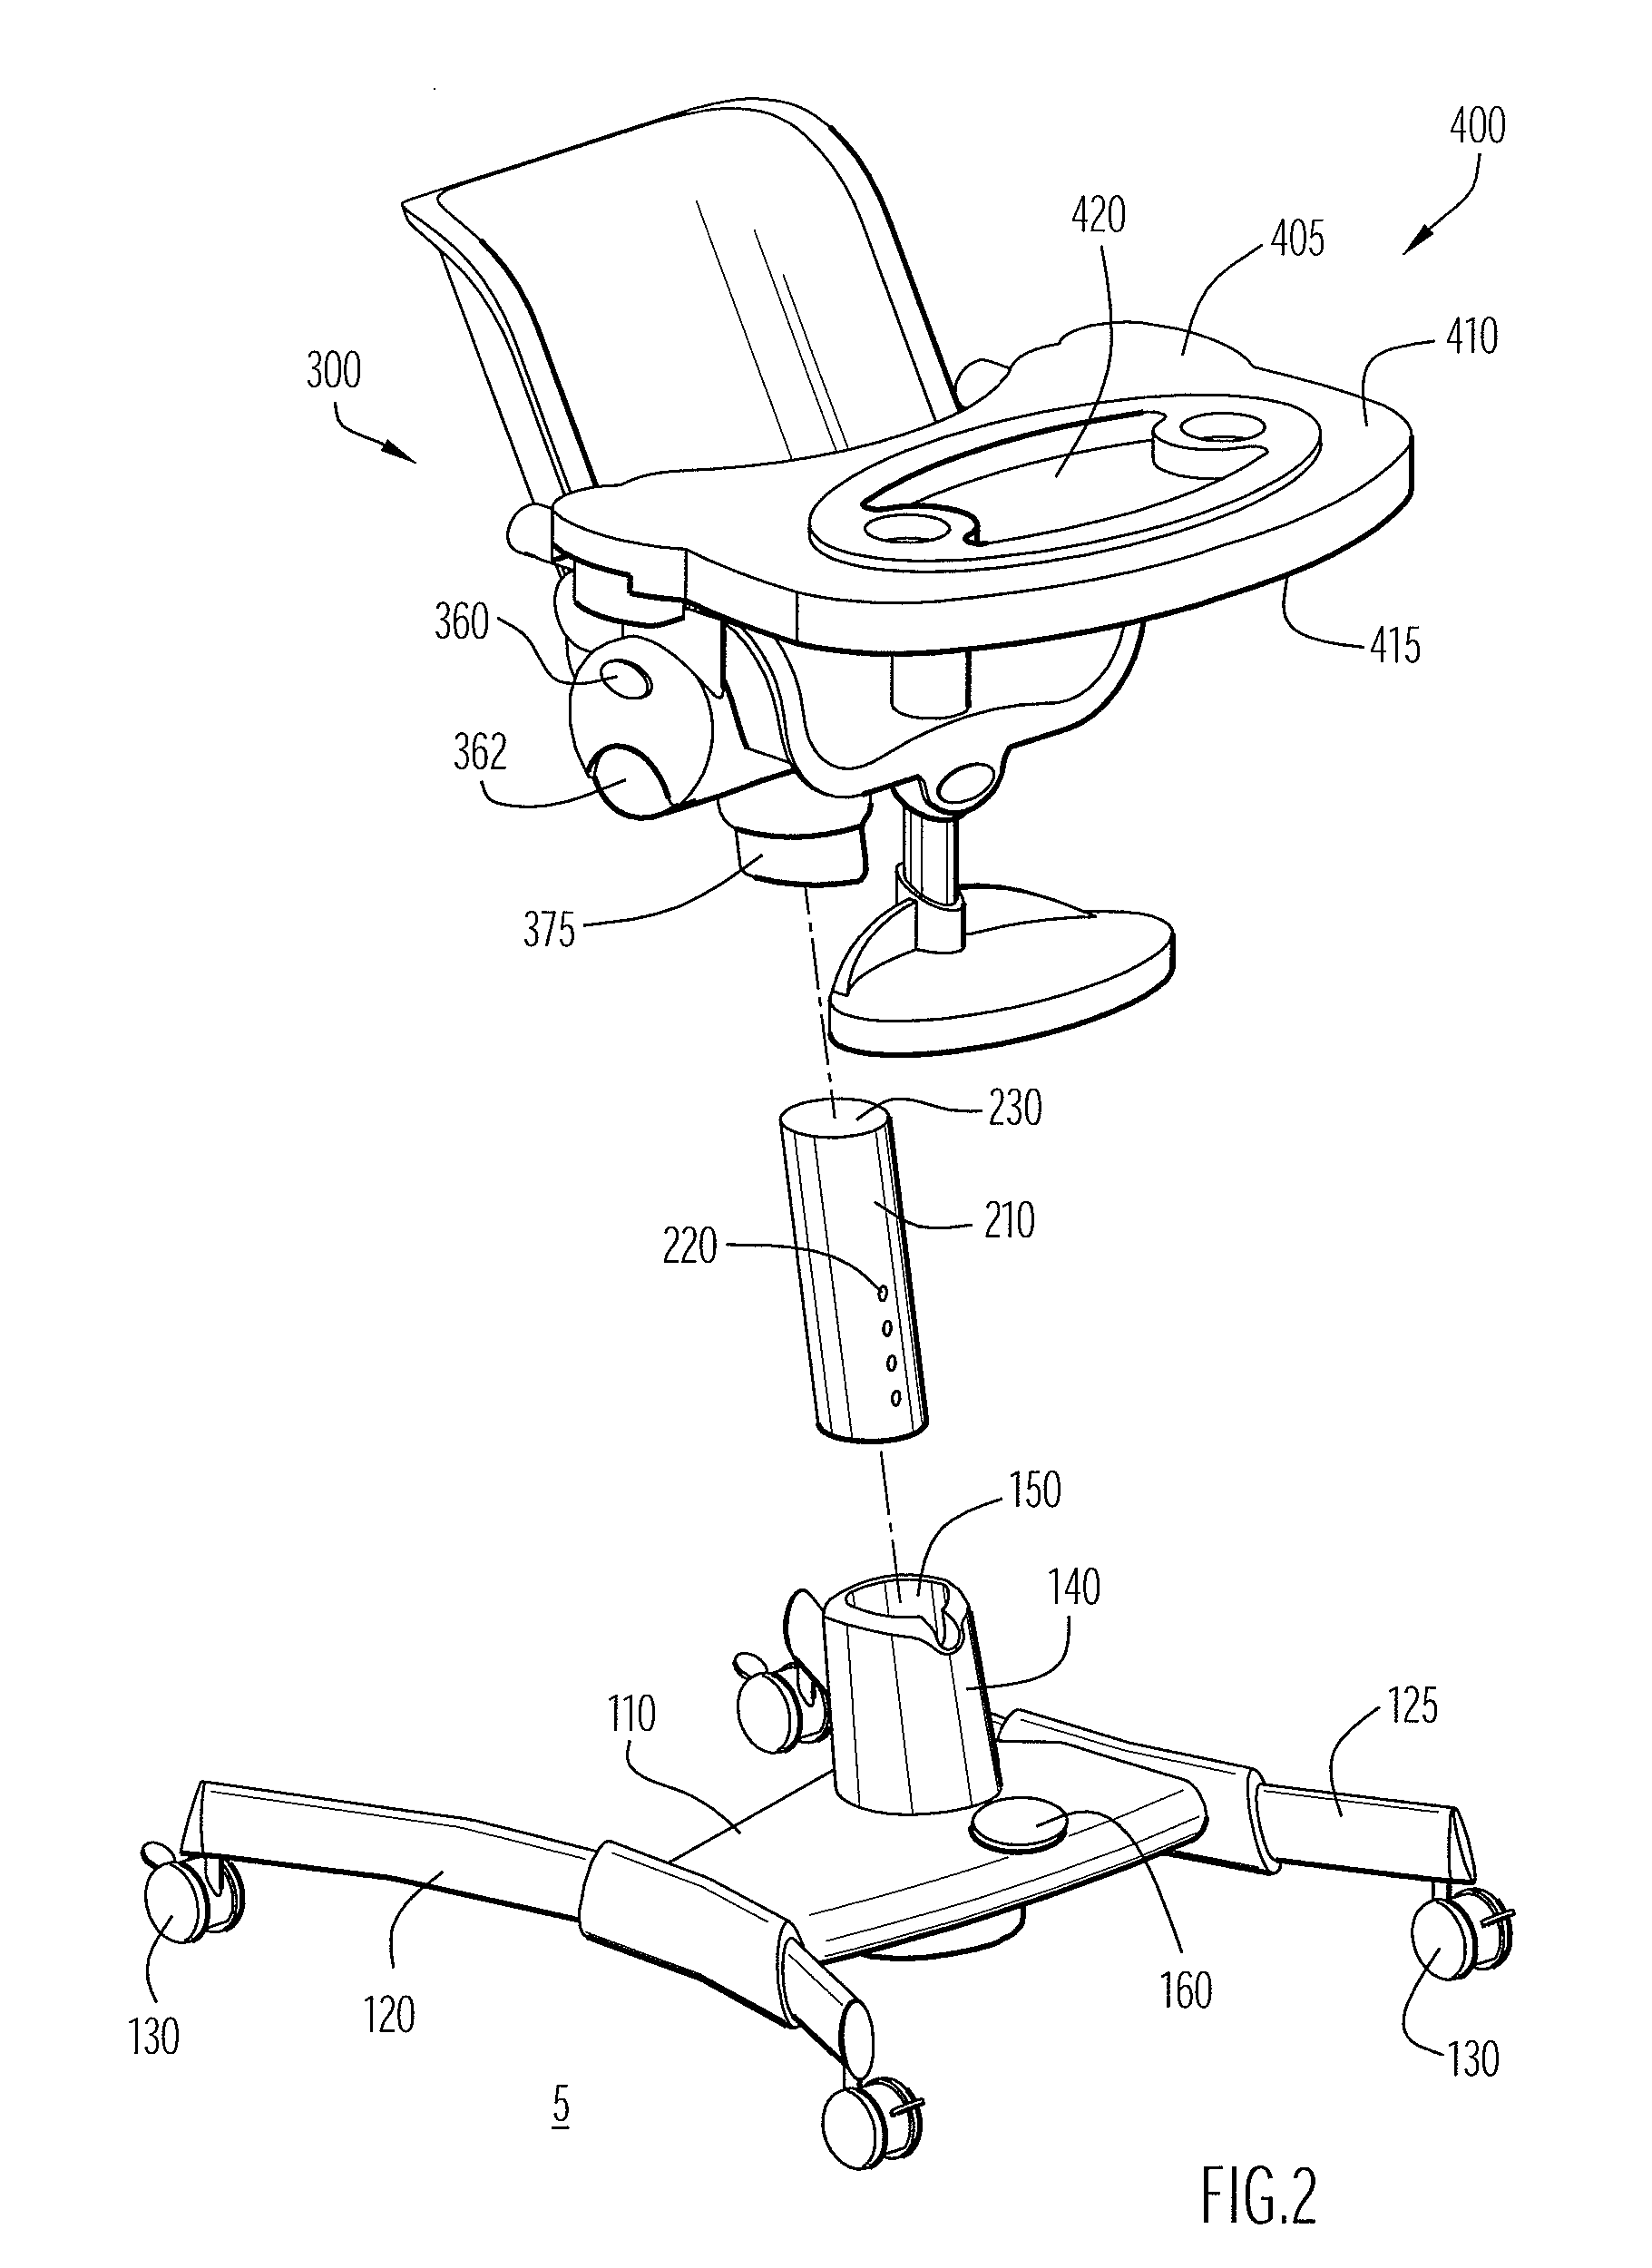 Adjustable Child Support Device